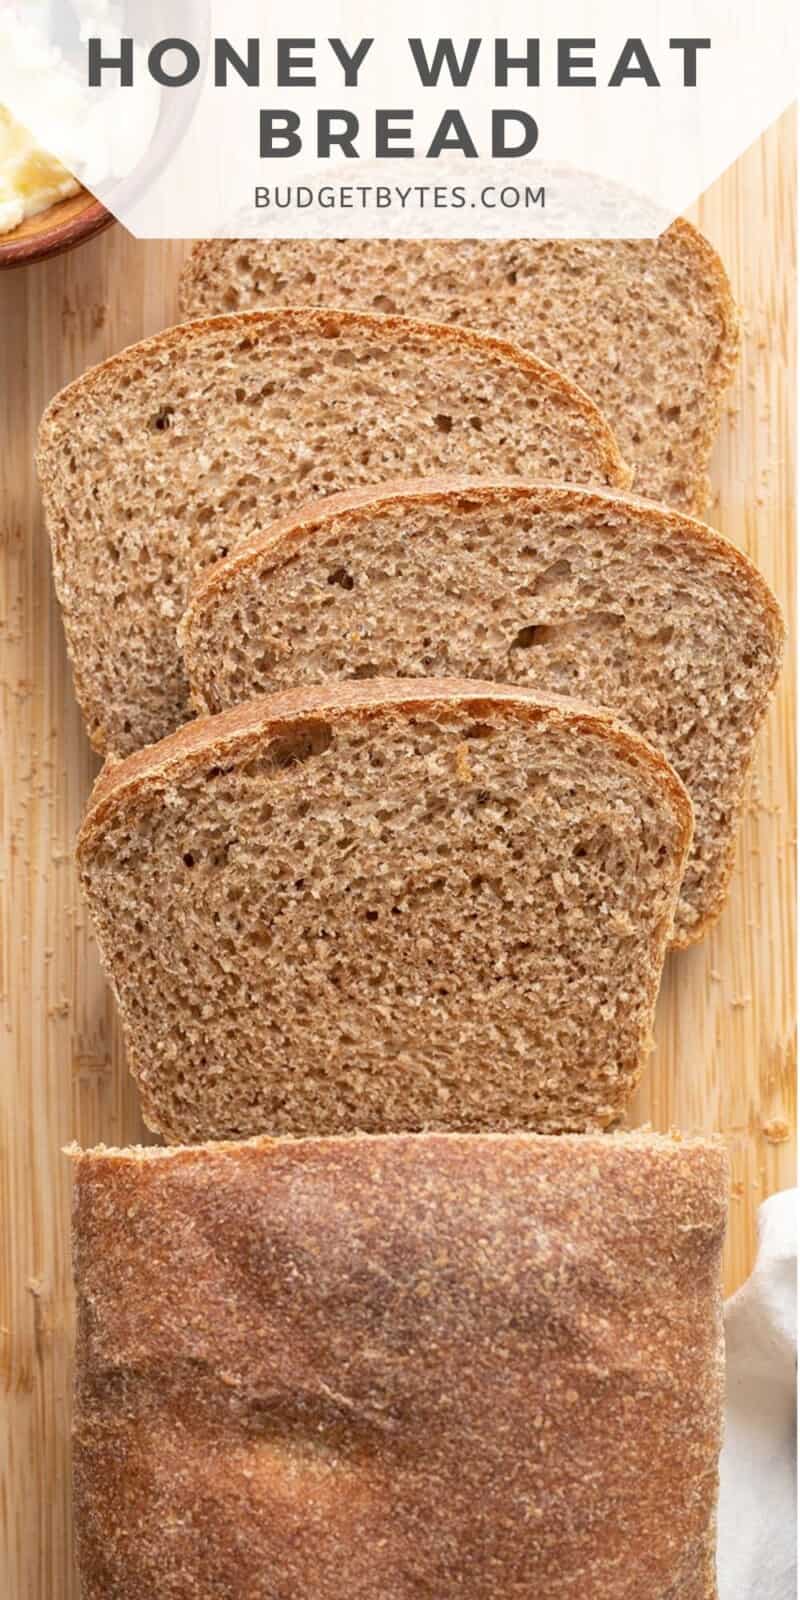 Overhead view of a sliced loaf of honey wheat bread.